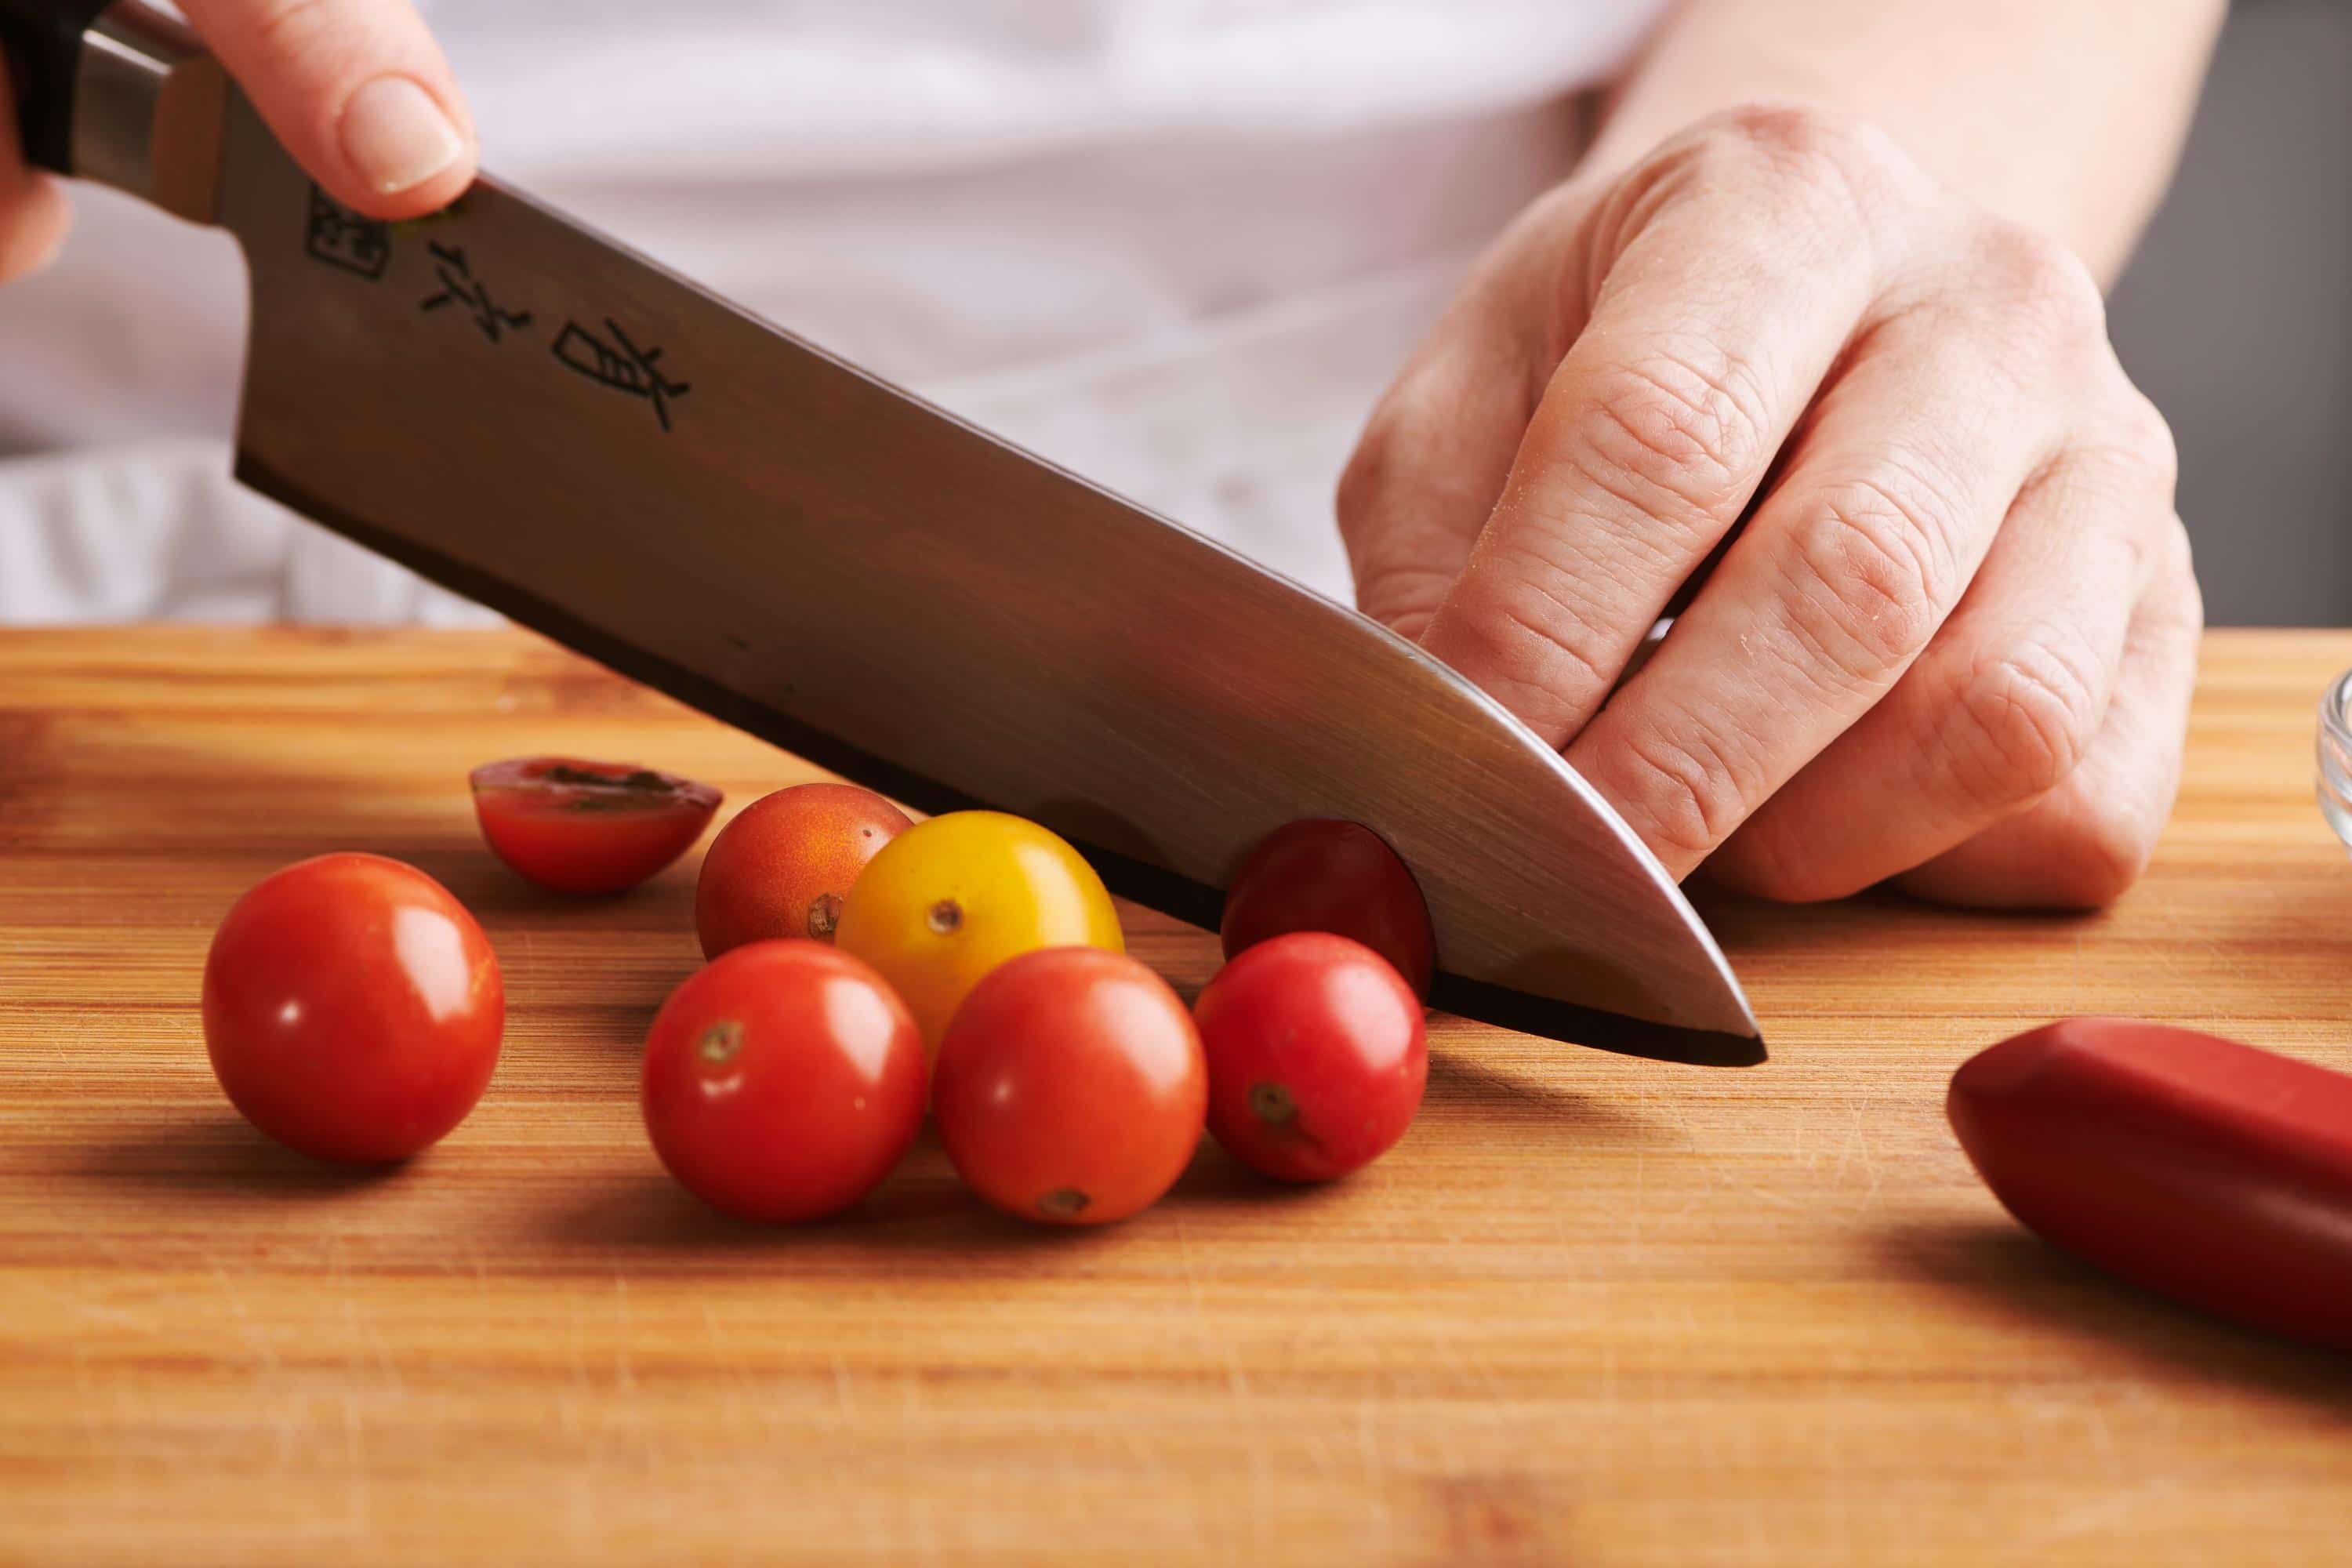 Slicing cherry tomatoes on cutting board with chef knife.